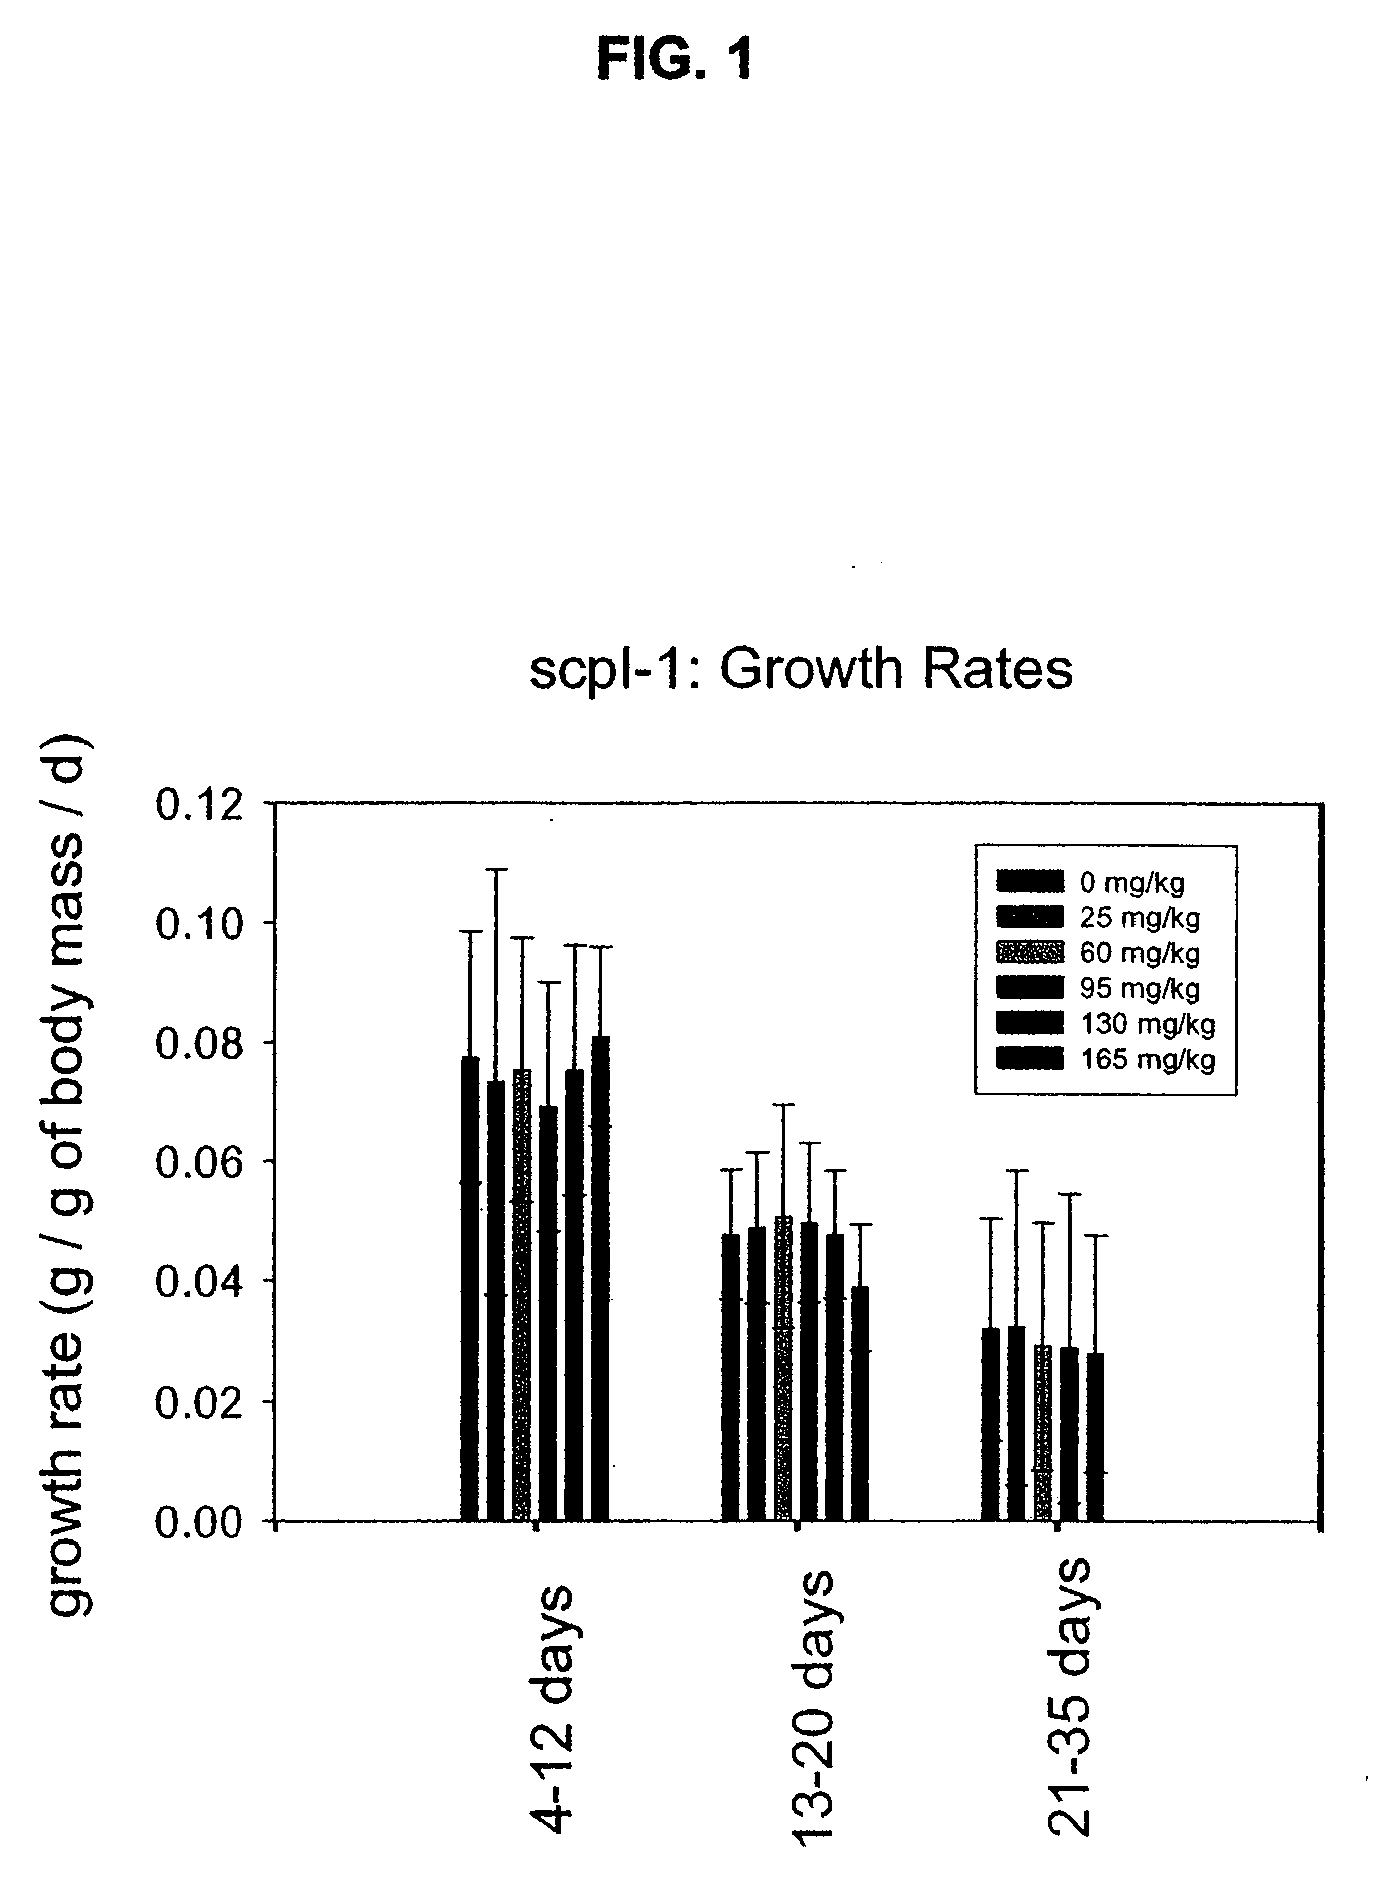 Sterol Carrier Protein-2 Inhibitors for Lowering Cholesterol and Triglyceride Levels in Mammals